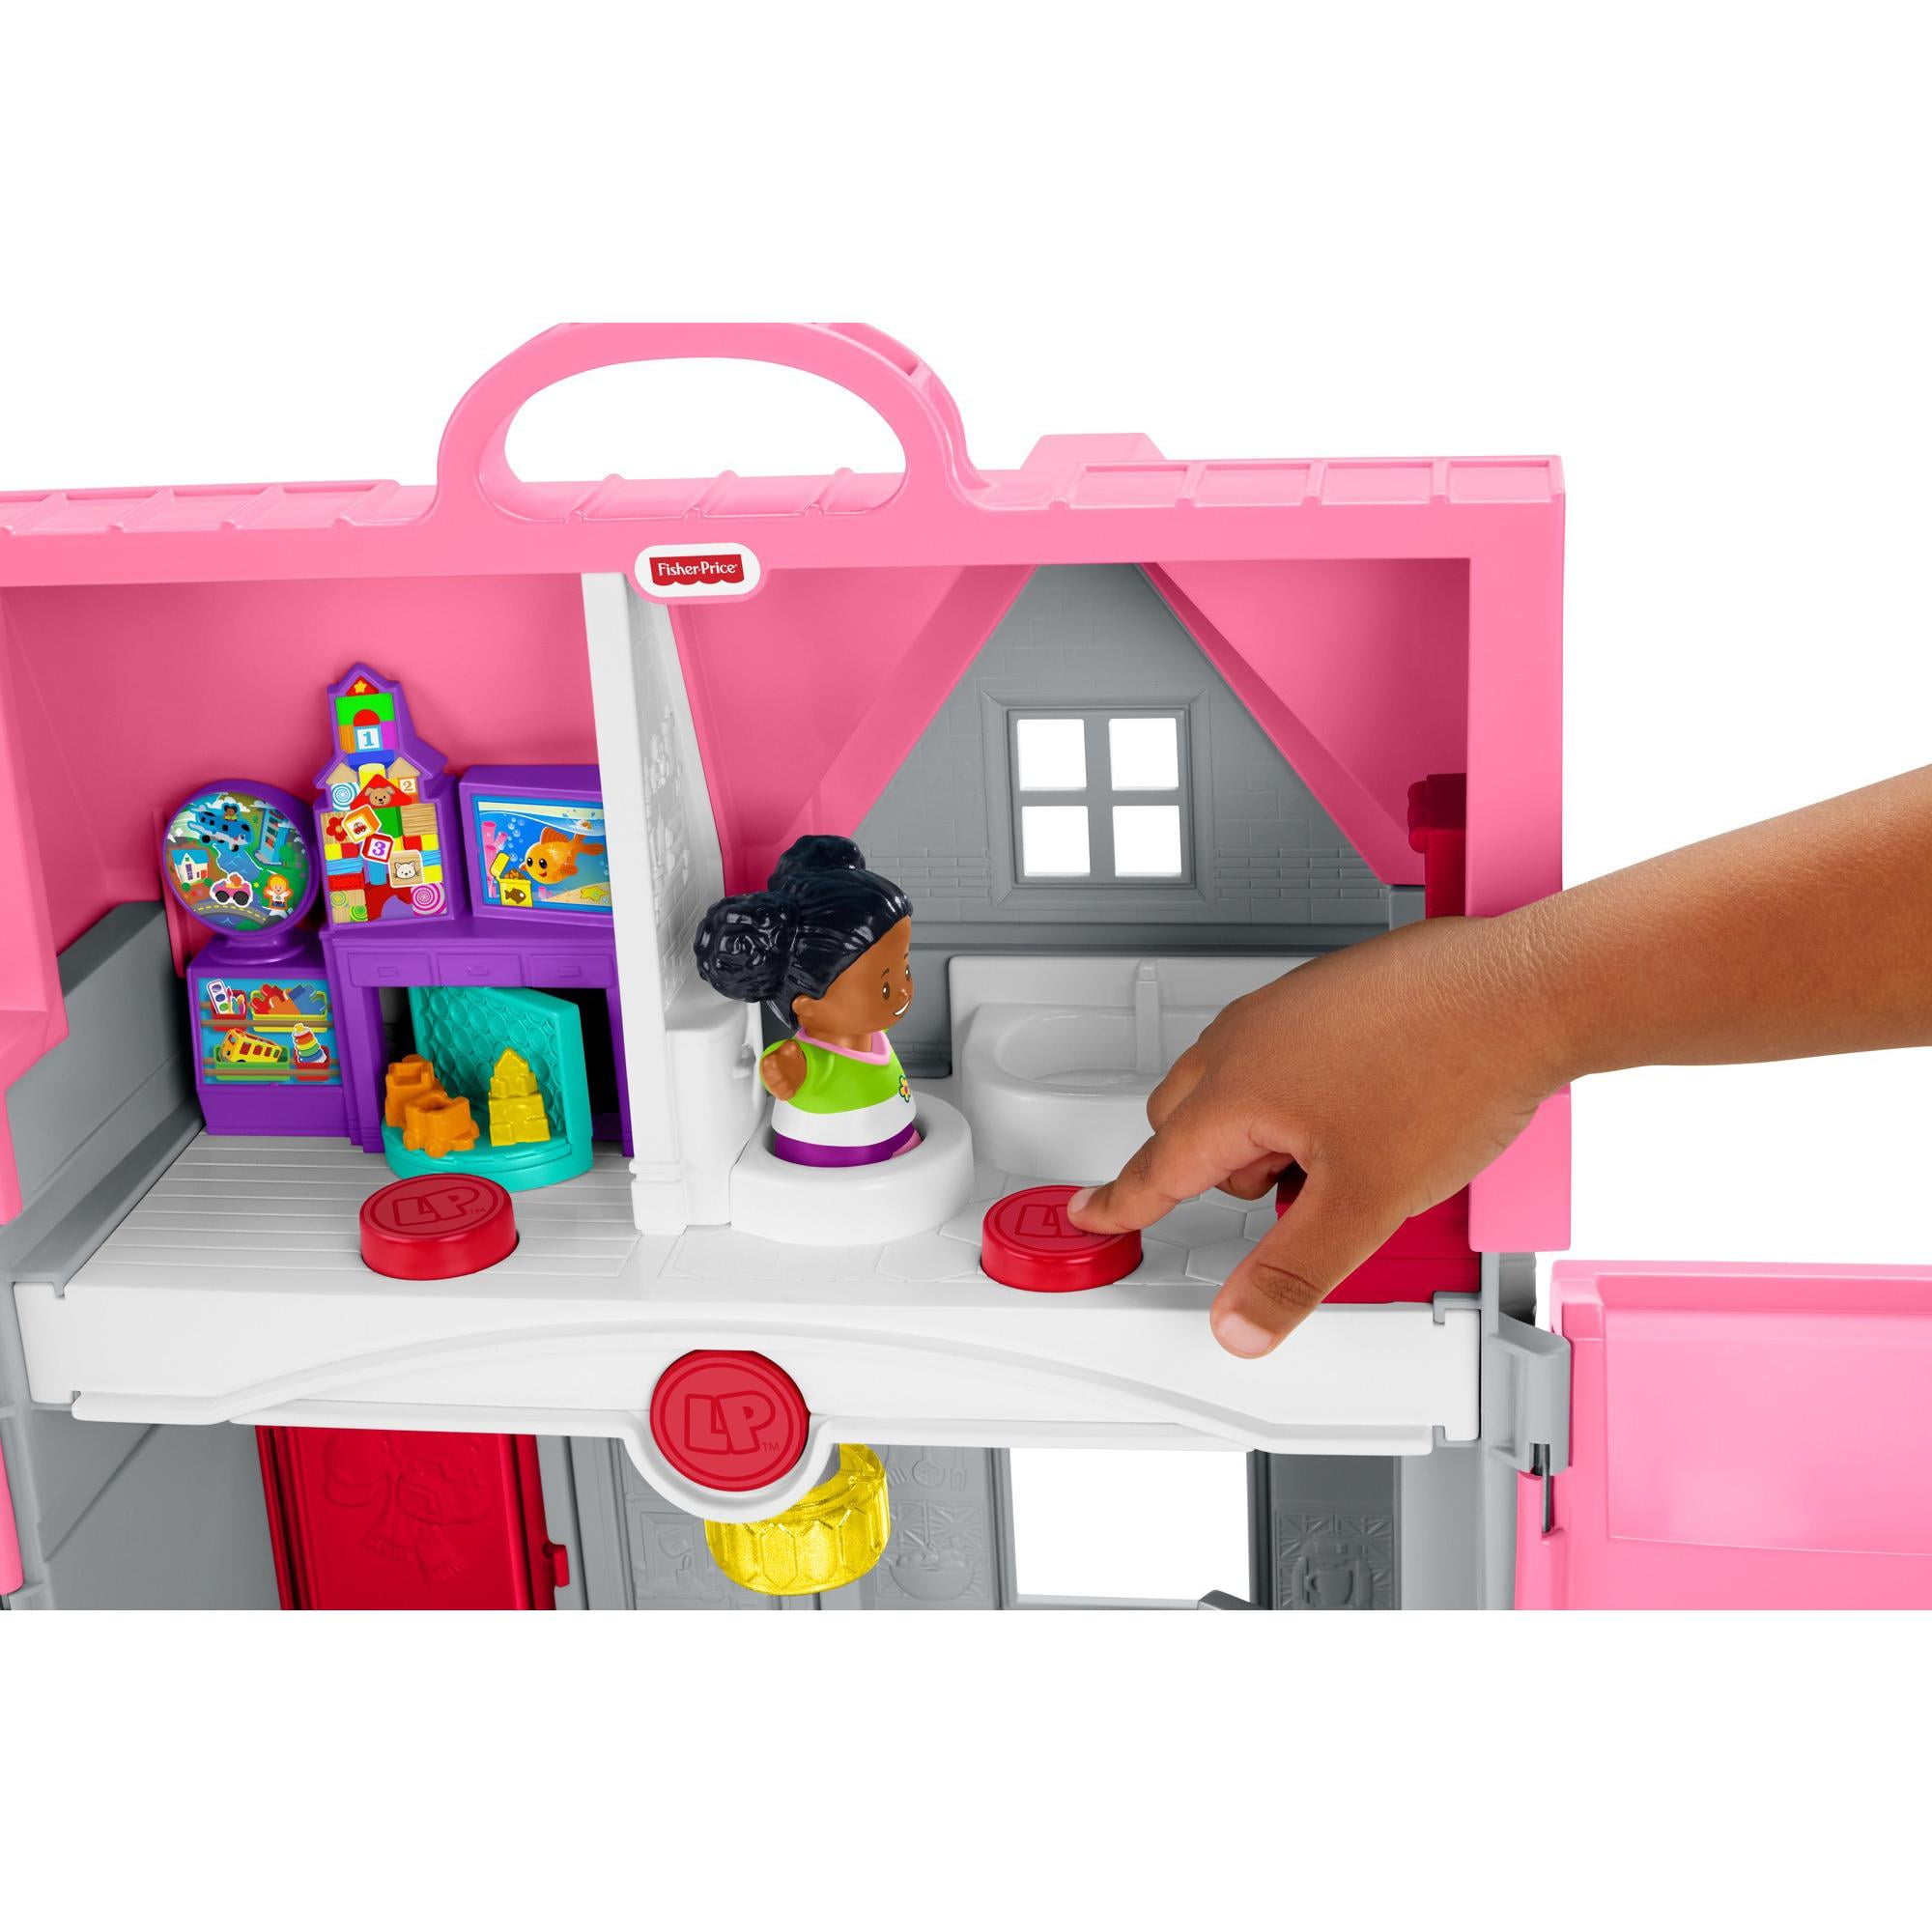 Fisher-Price Little People Big Helpers Home Pink FWX13 *NEW*